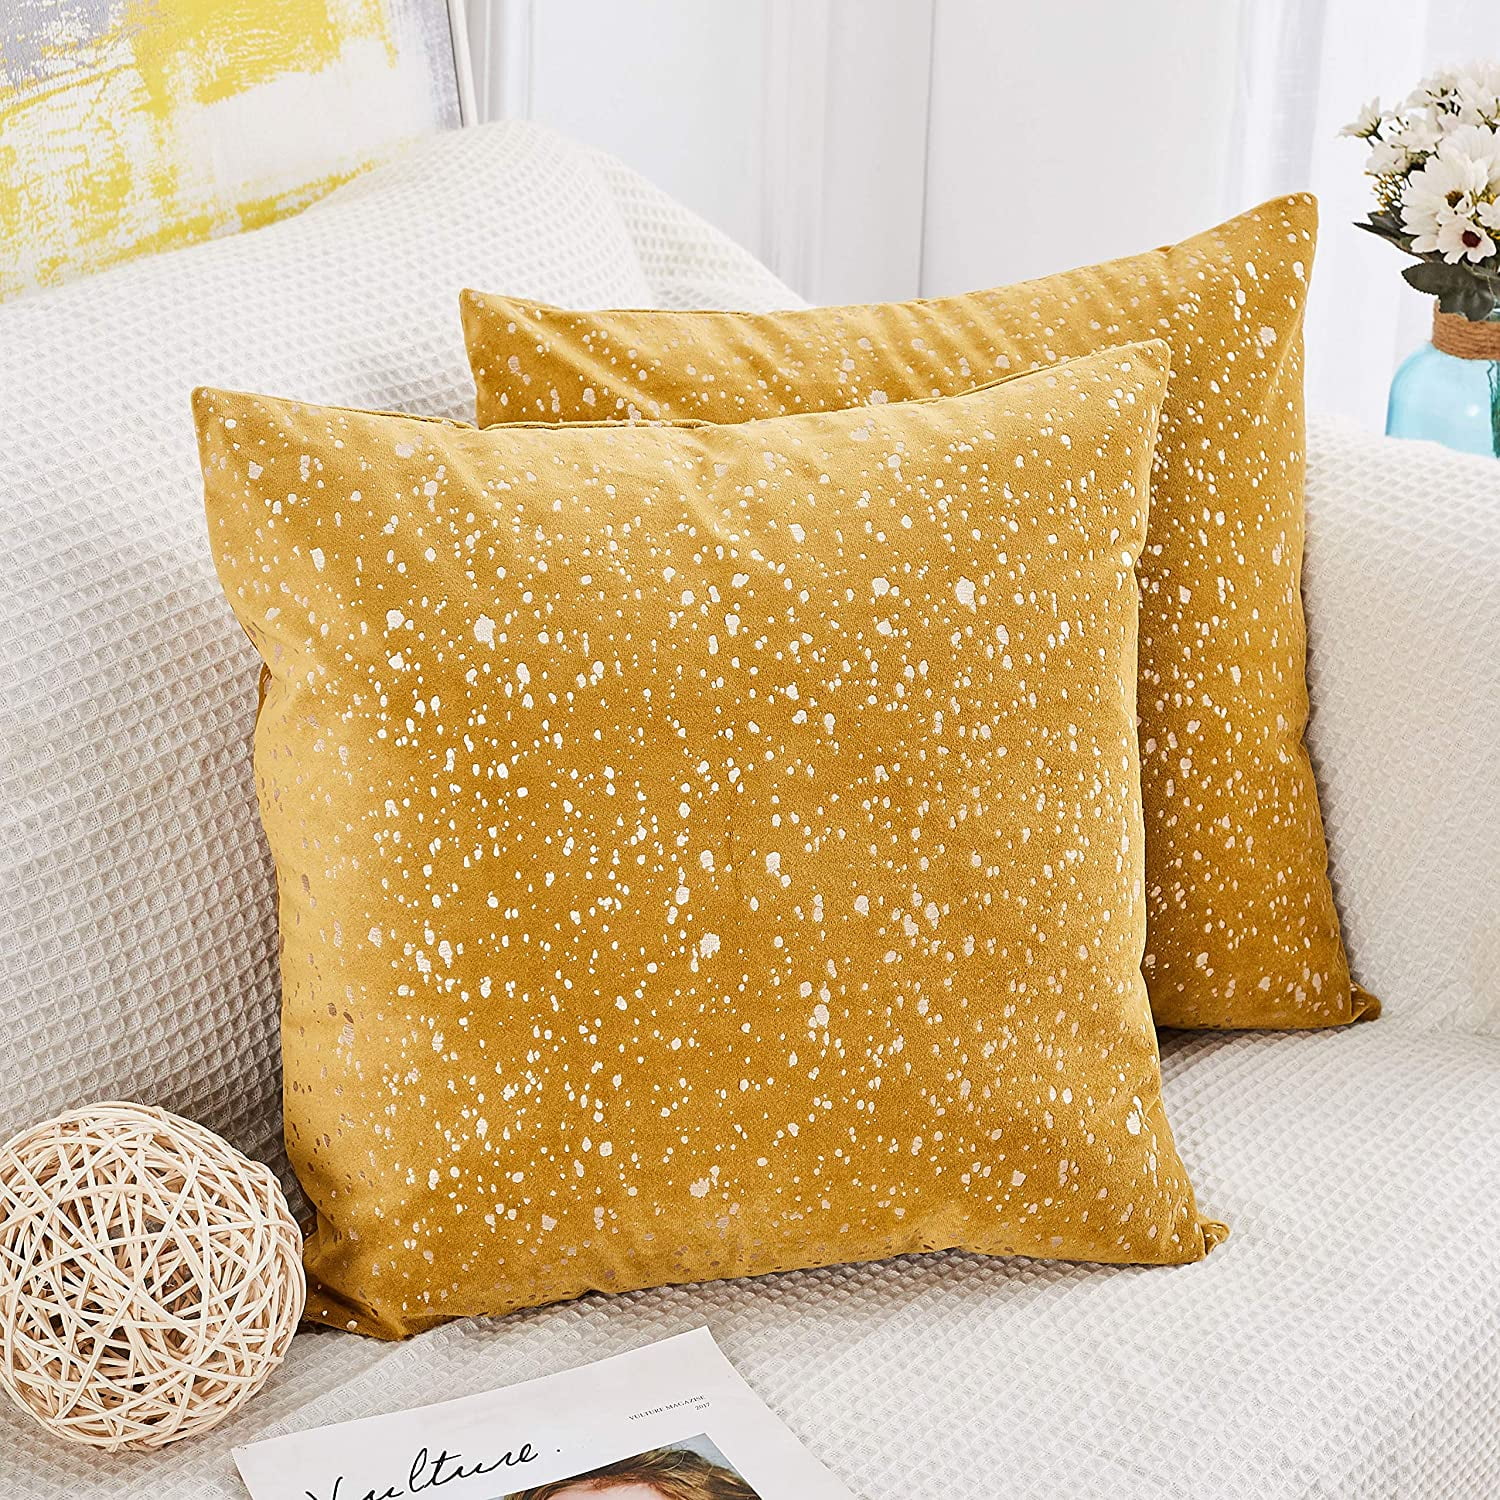 Pom Pom 18x18 Set of 2 PAVILIA Mustard Yellow Throw Pillow Covers Gold Yellow Fleece Accent Pillow Case Pompom Decorative Velvet Cushion Covers for Sofa Couch Bed